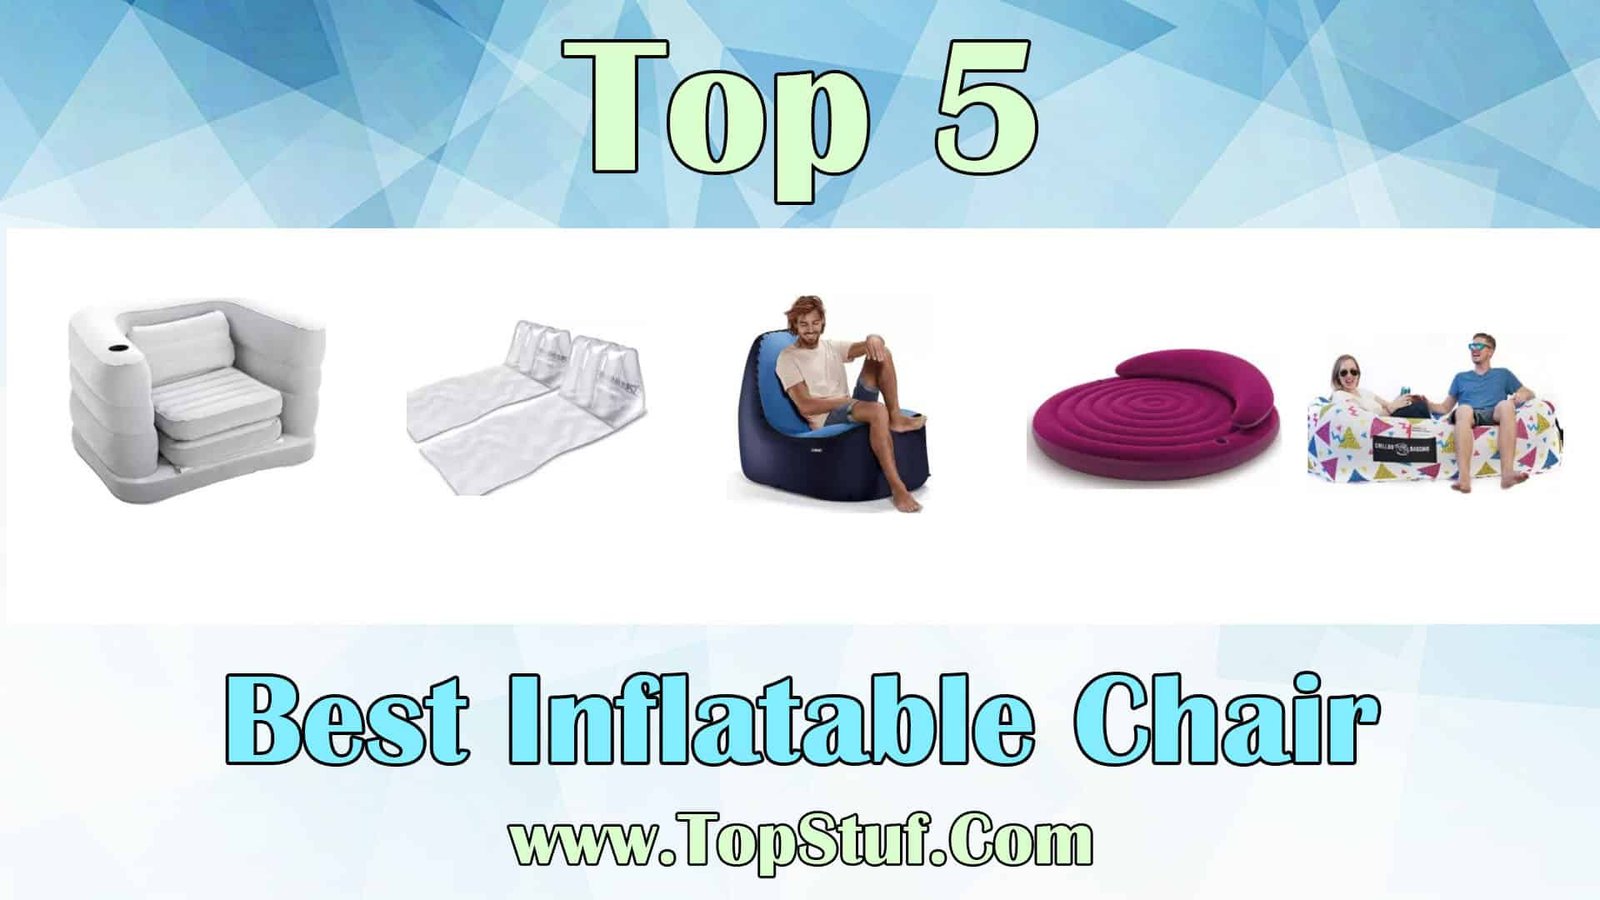 Best Inflatable Chair 2022 - Make yourself comfortable